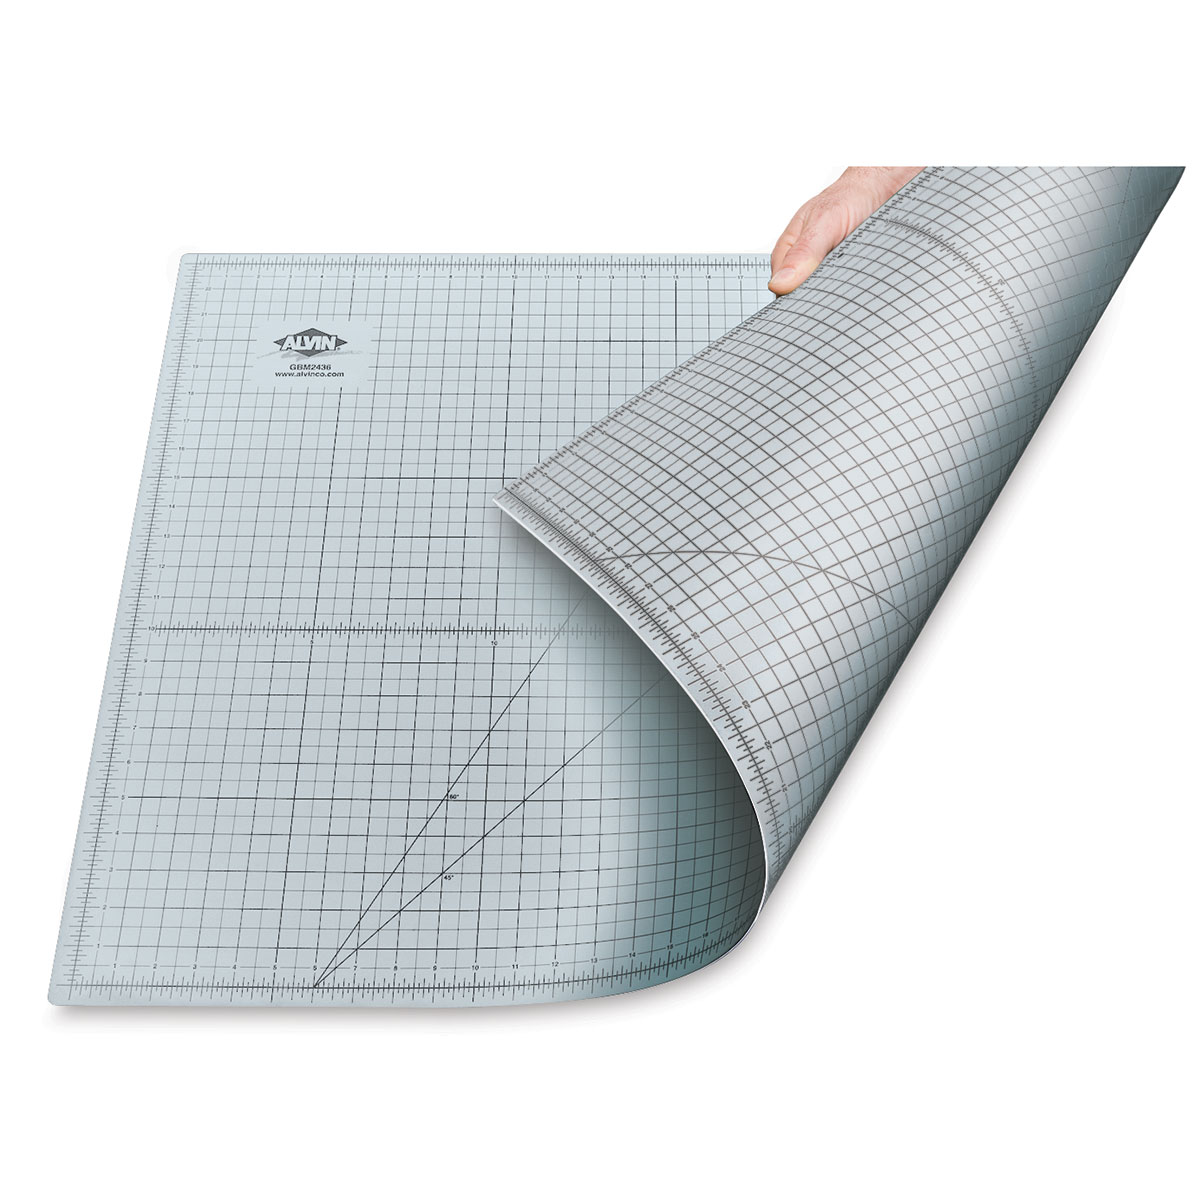 Art Cutting Mat: Over 1,391 Royalty-Free Licensable Stock